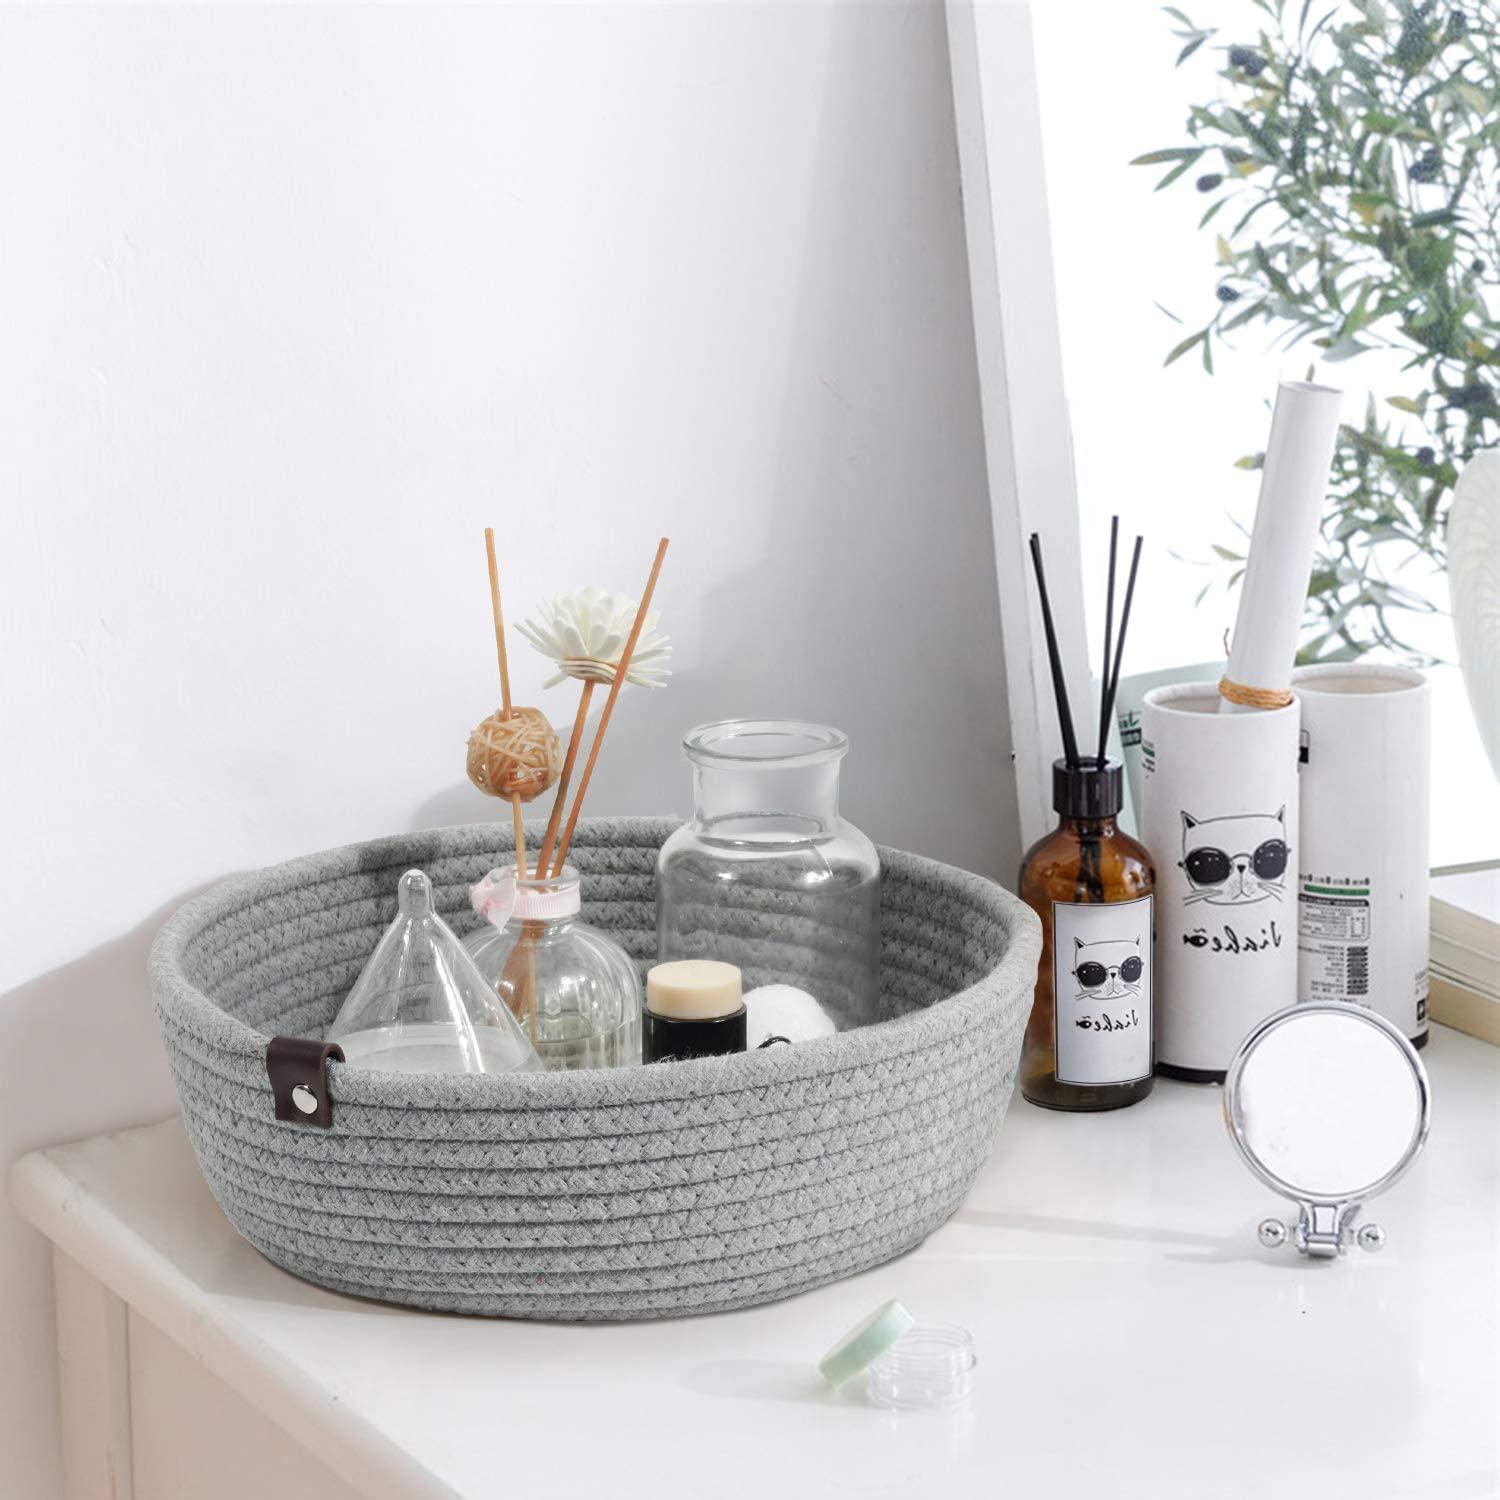 Goodpick 3pack Small Basket - Woven Storage Basket for Living Room